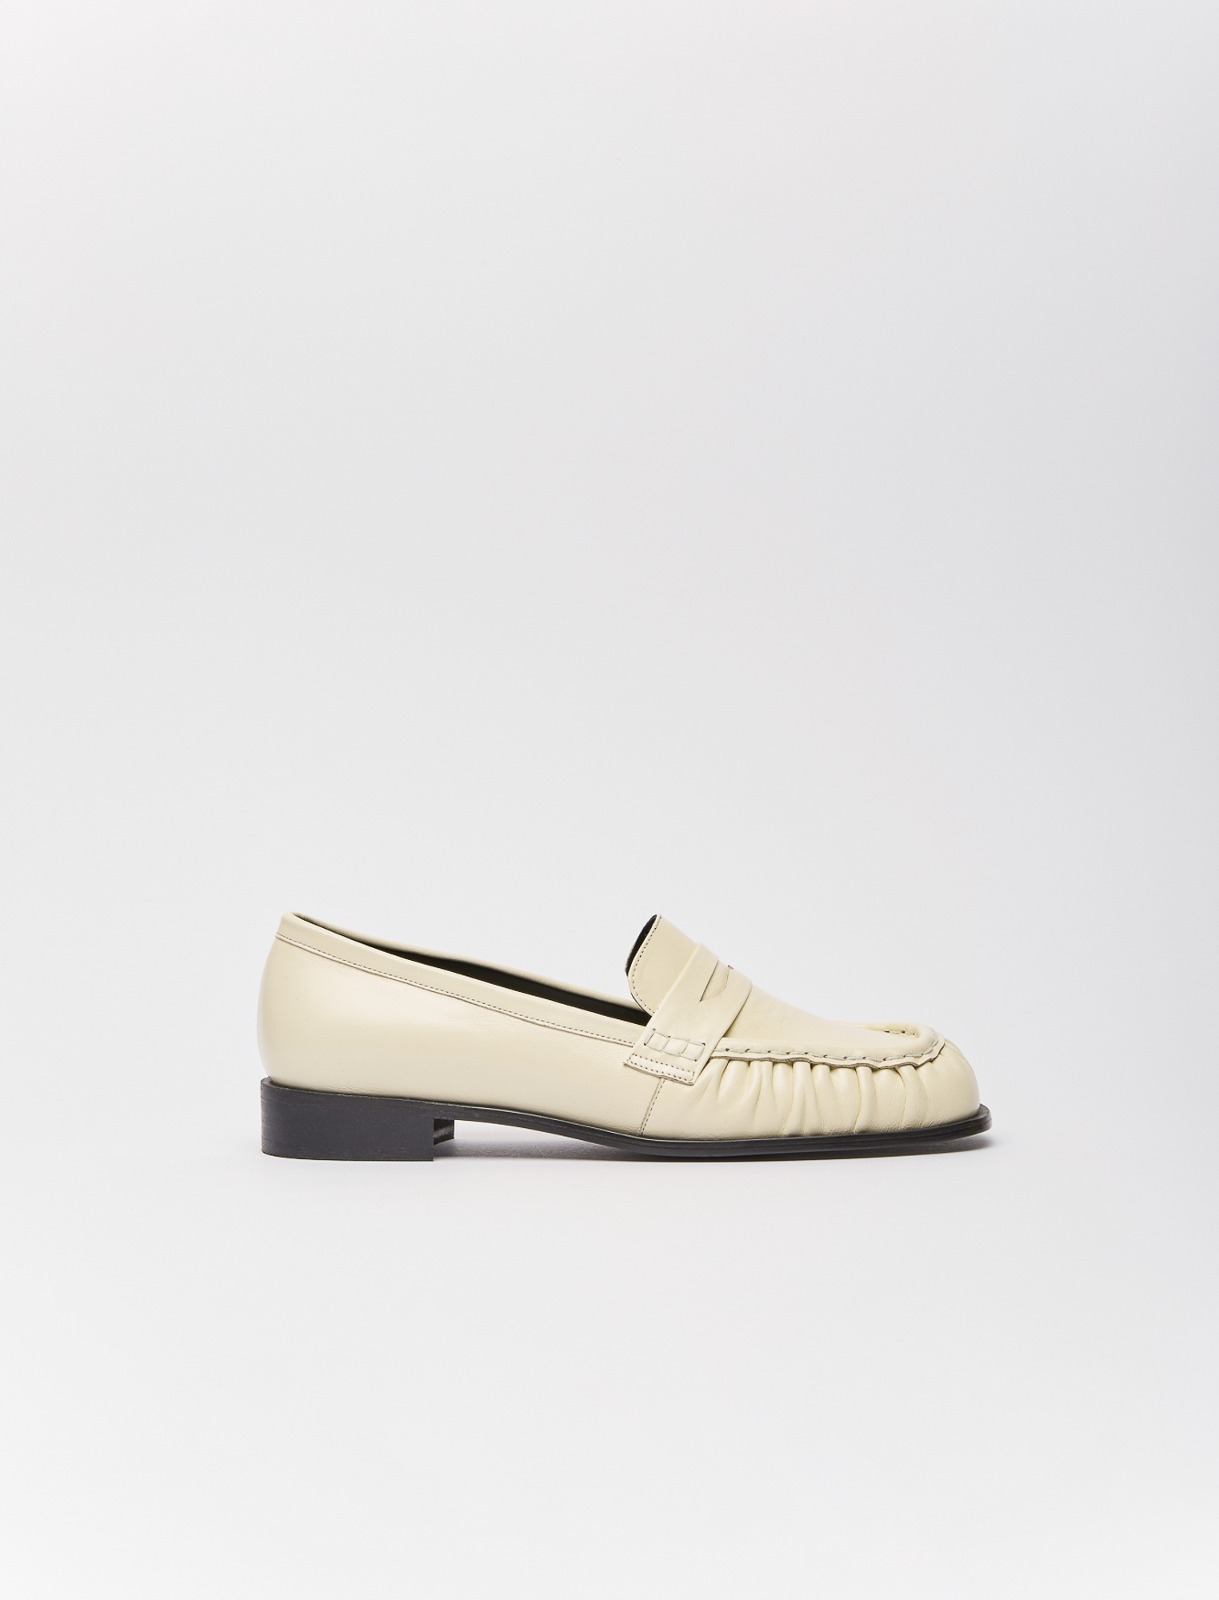 020 Le classic penny loafers (Butter)